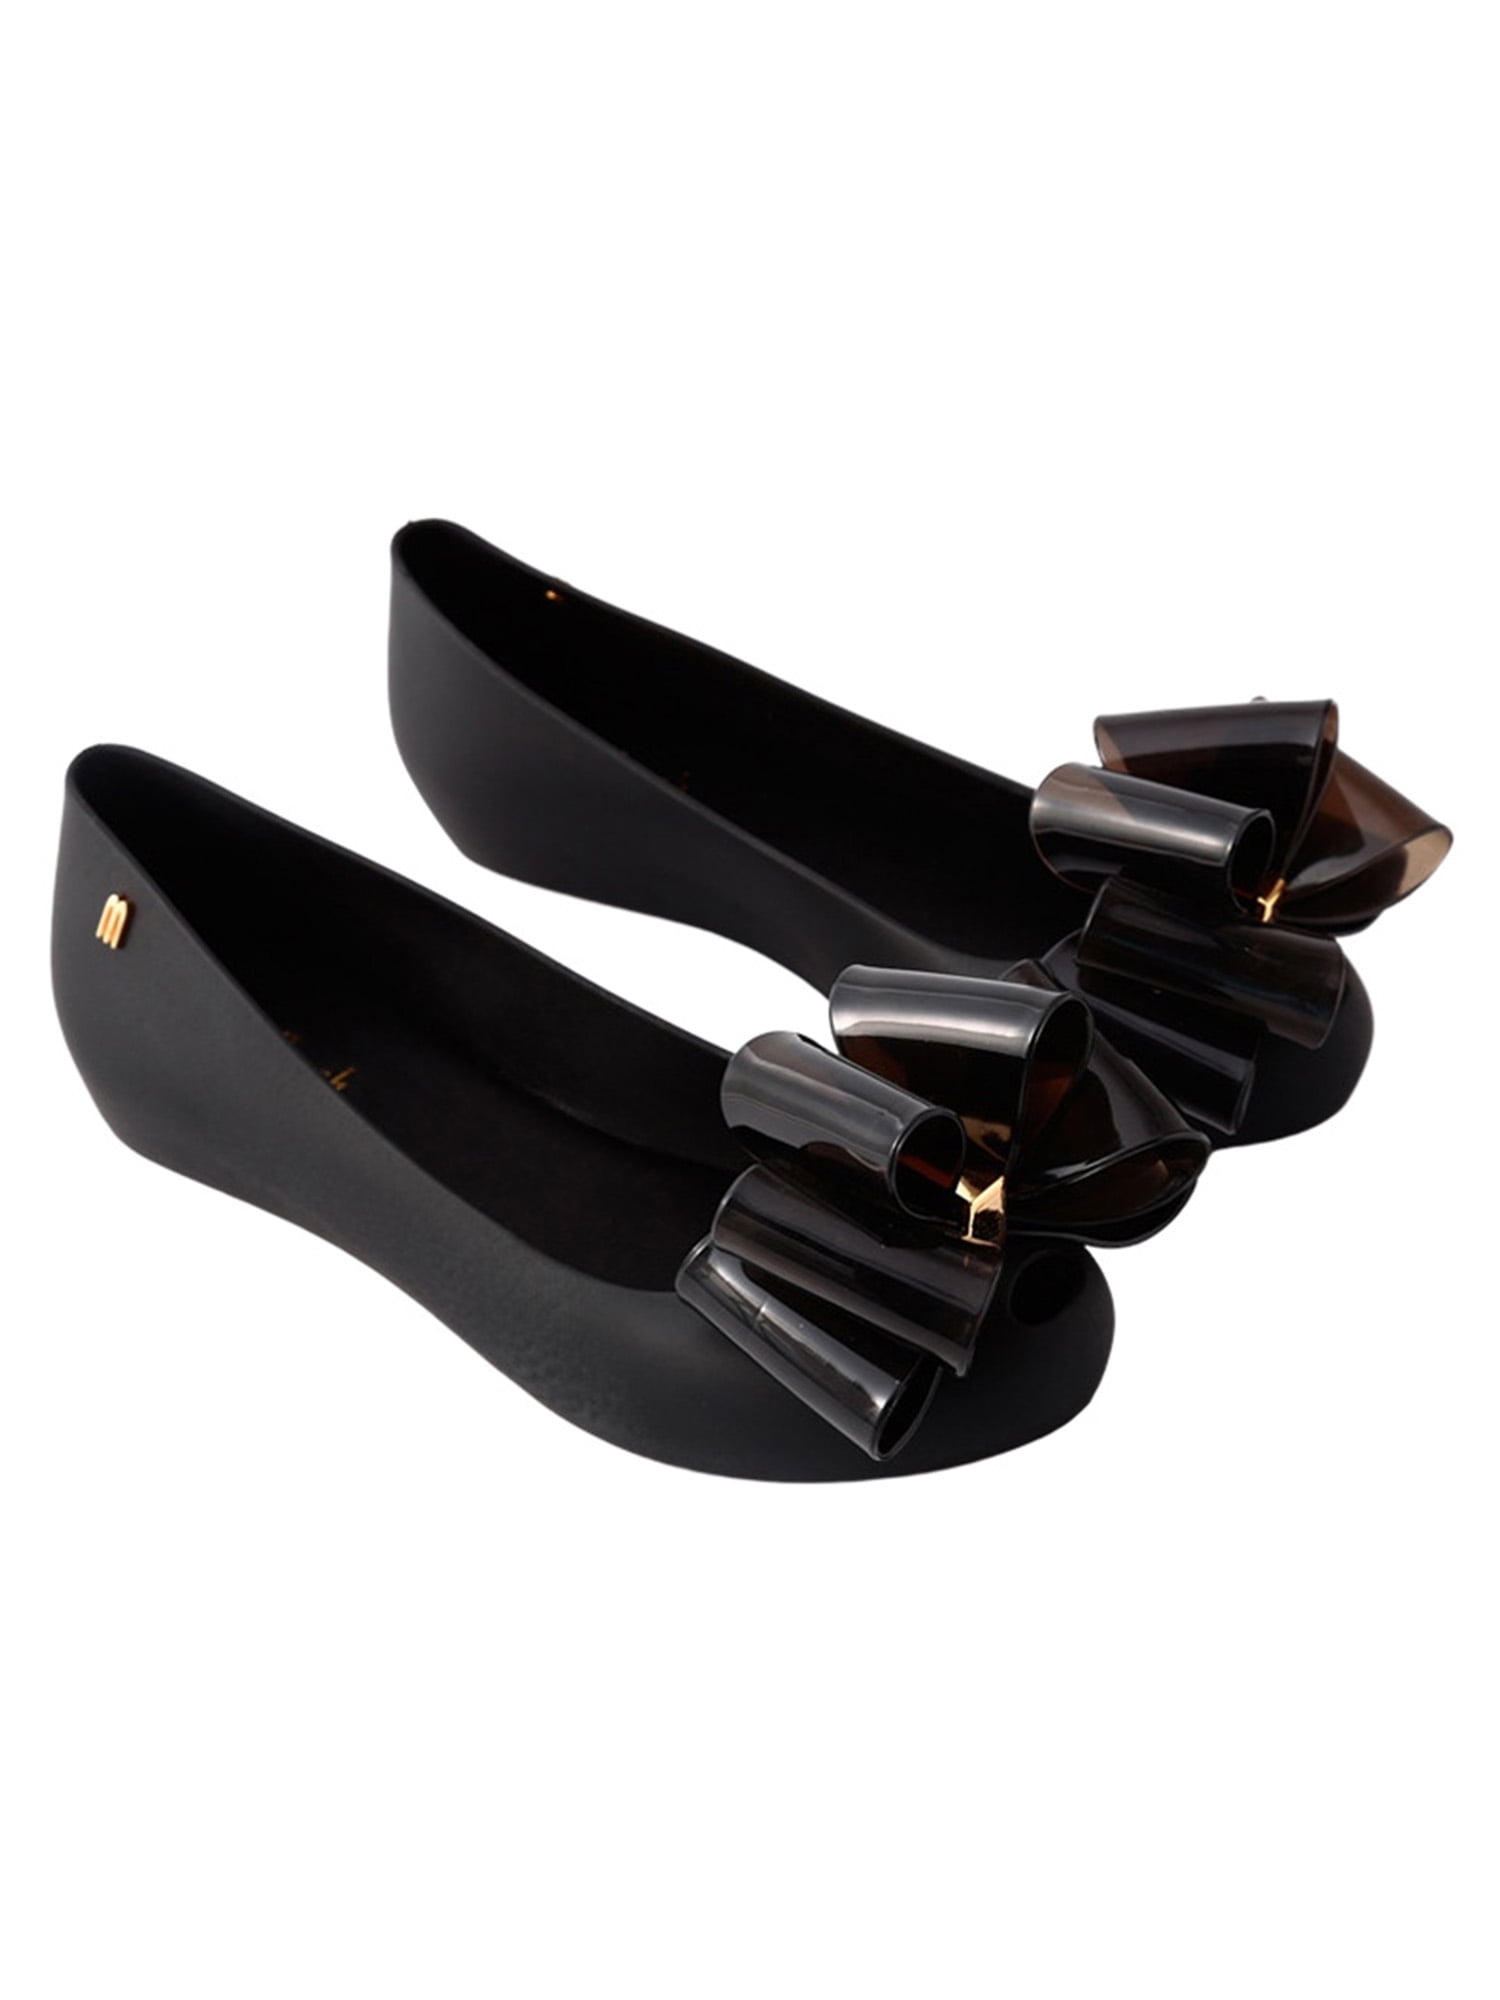 Buy > flat jelly shoes > in stock